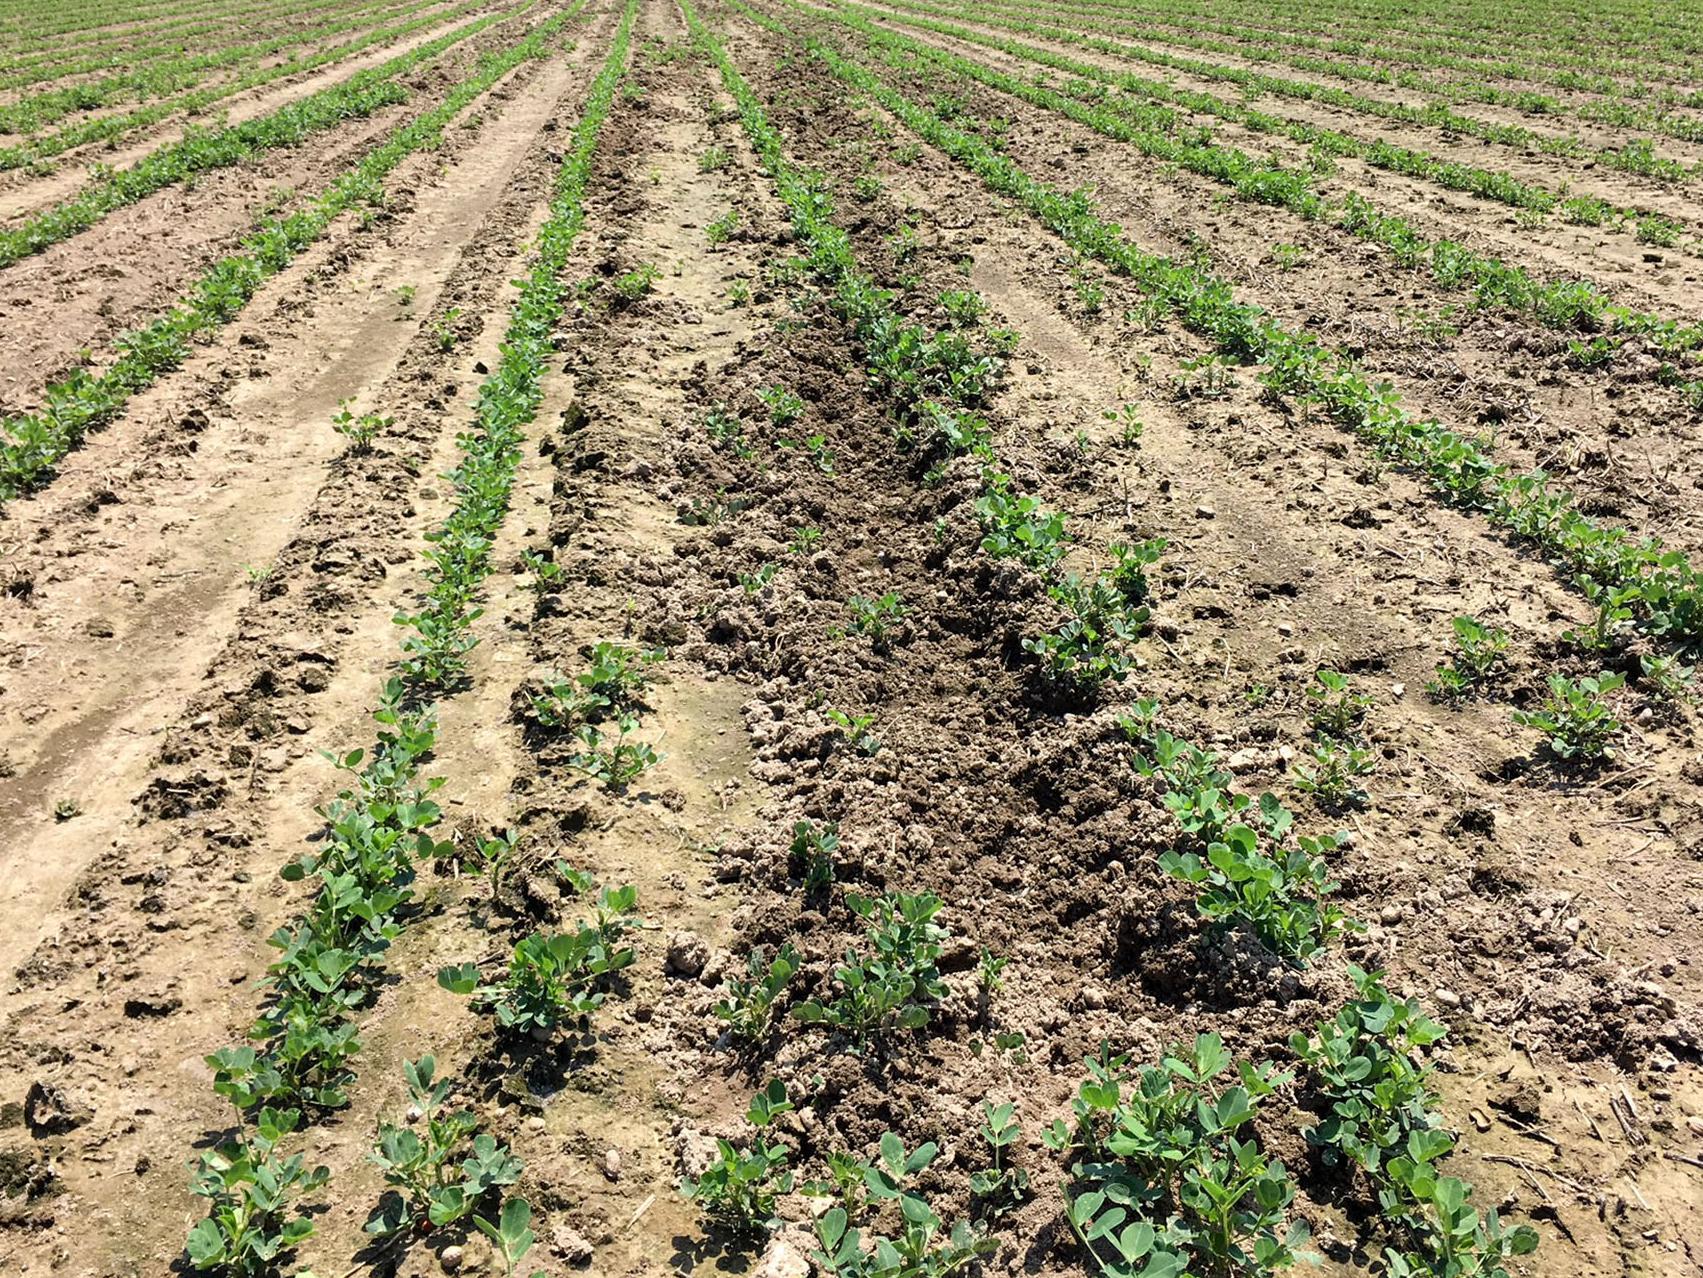 Rows of small green plant, some near disturbed soil, in a large field.